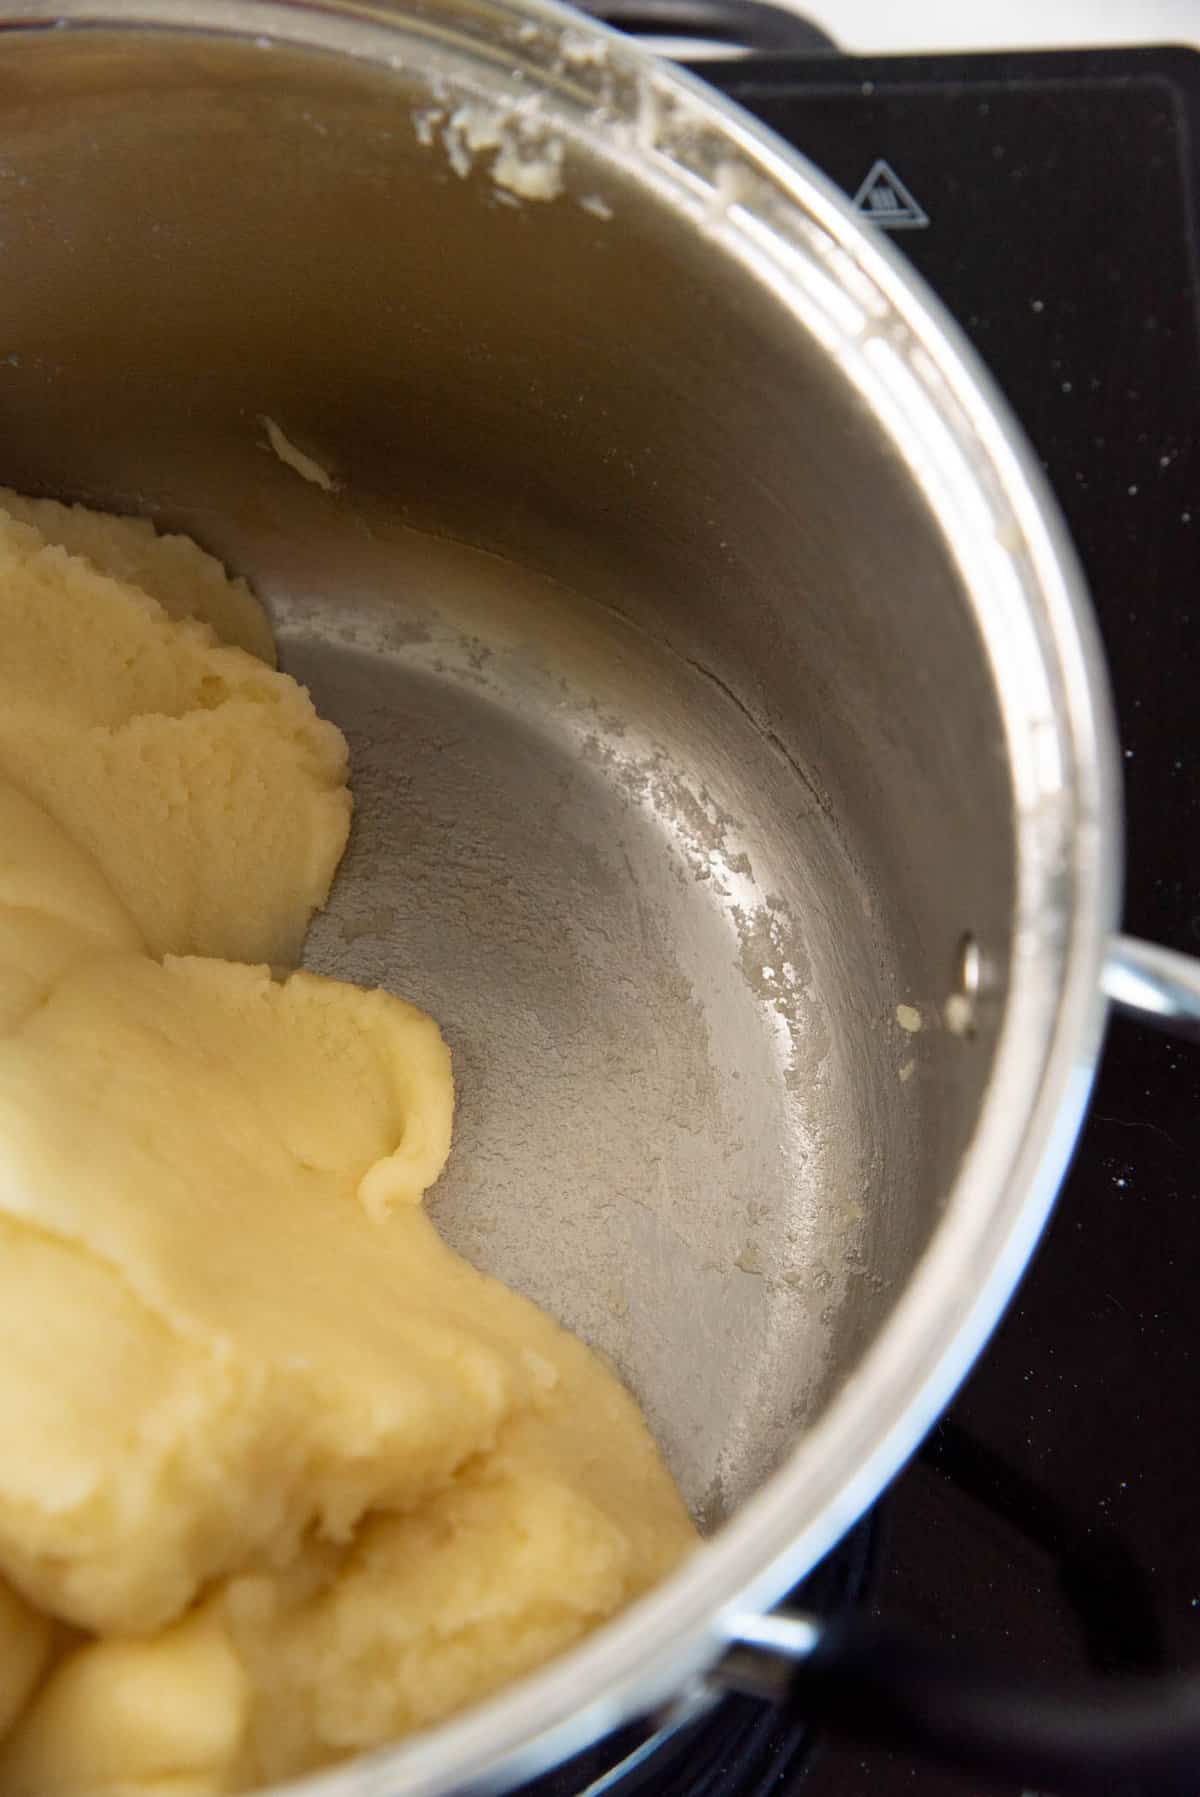 An image showing a thin dough film on the bottom of the saucepan, which is an indication to look for when making choux pastry.